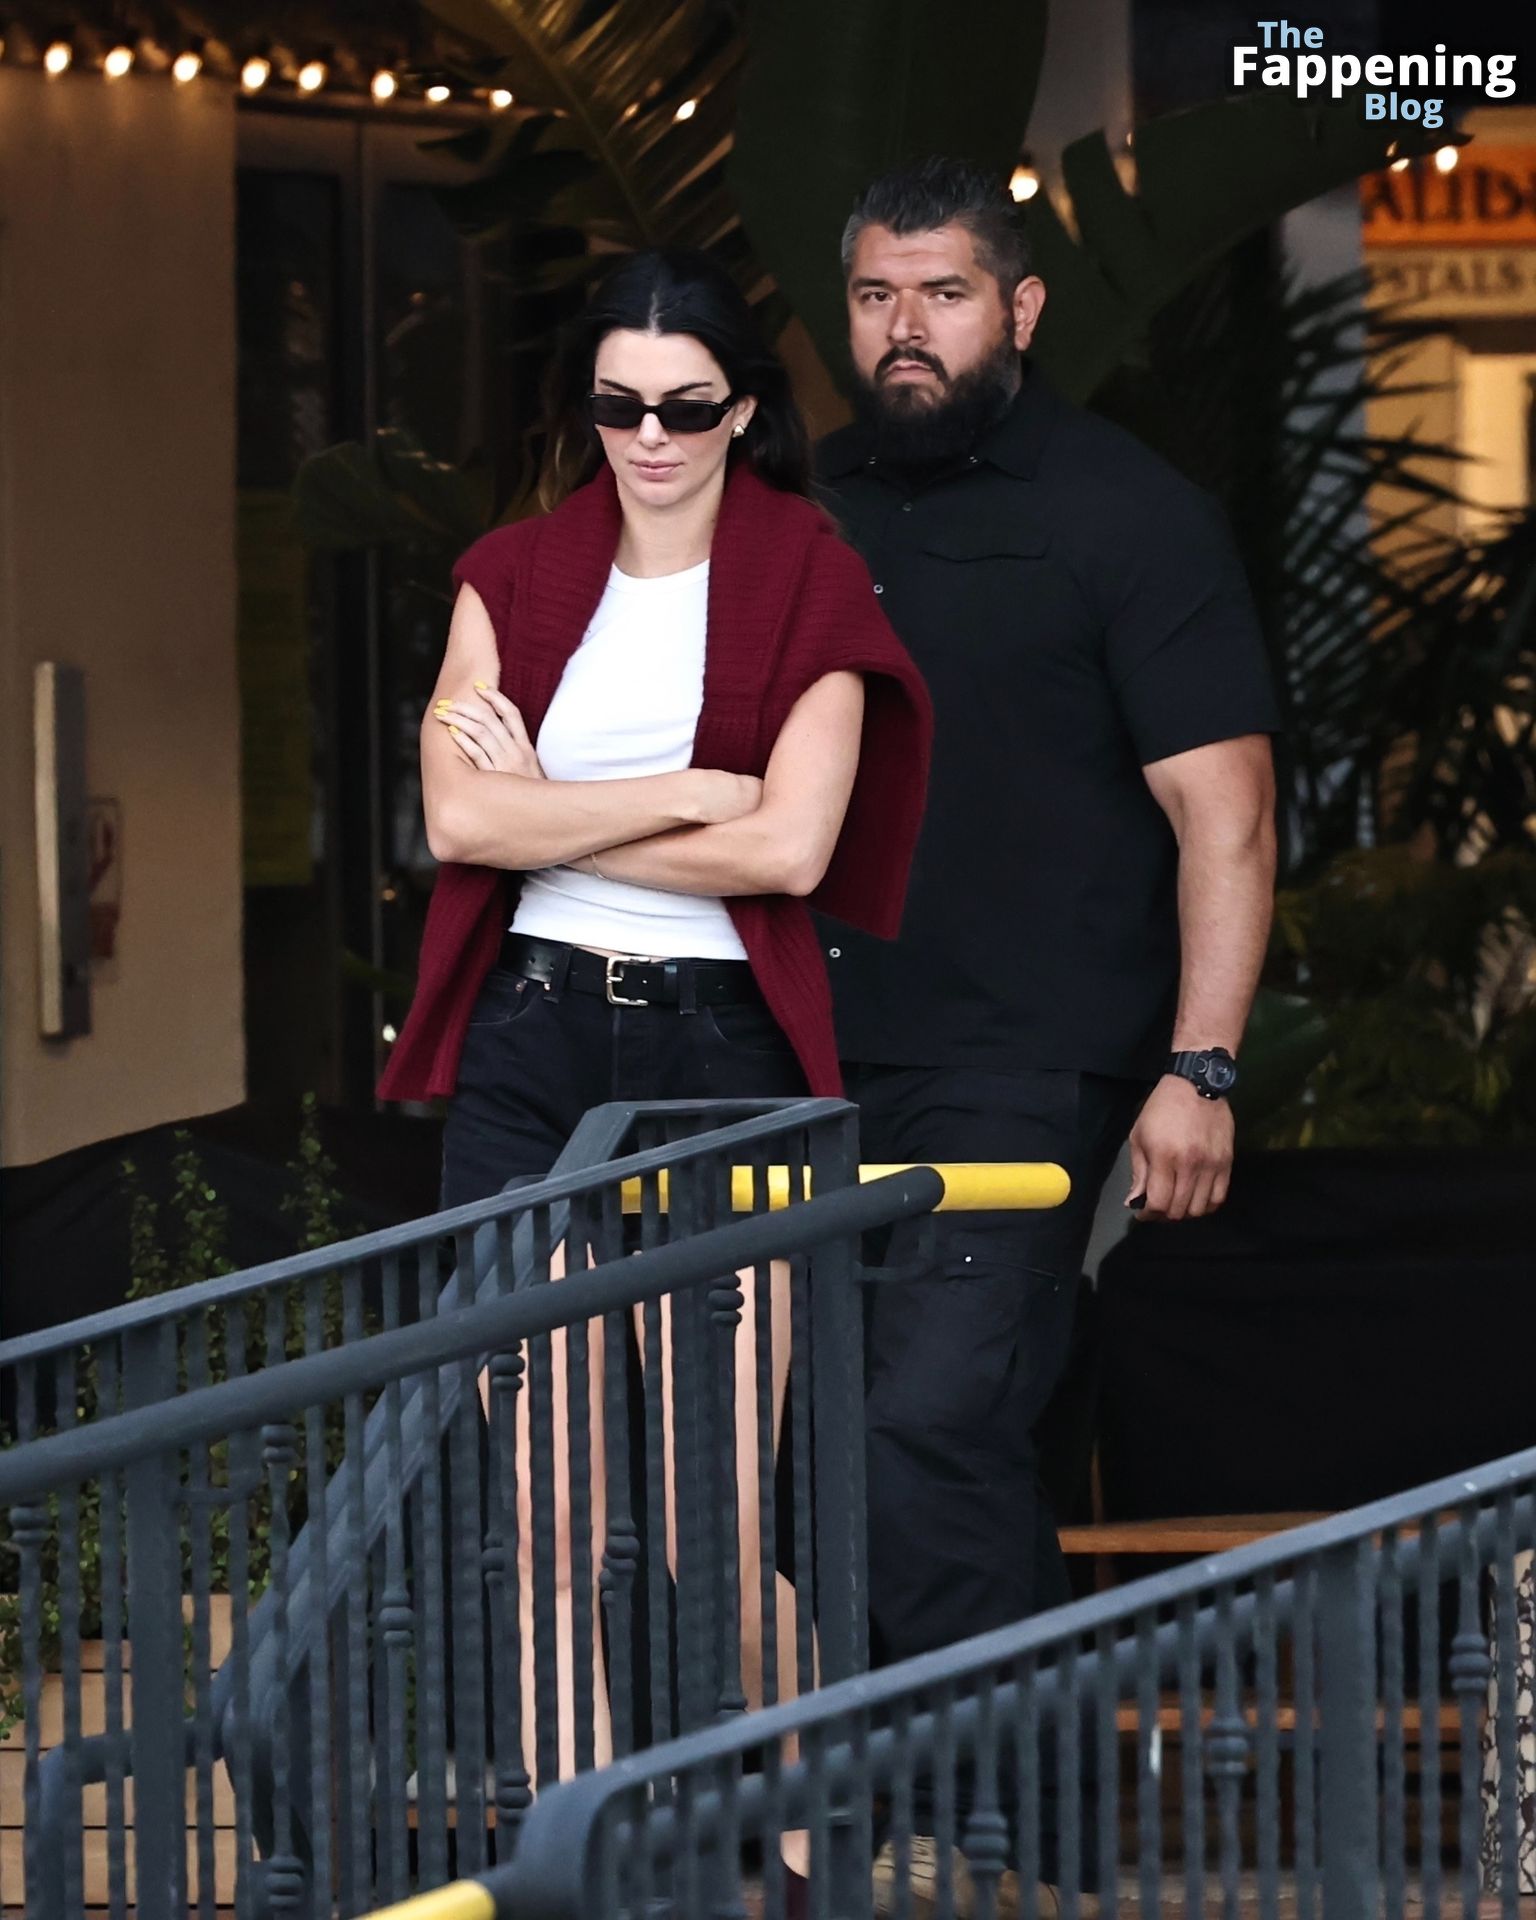 Kendall Jenner Puts on a Casual Leggy Display While Out Shopping with Friends (31 Photos)